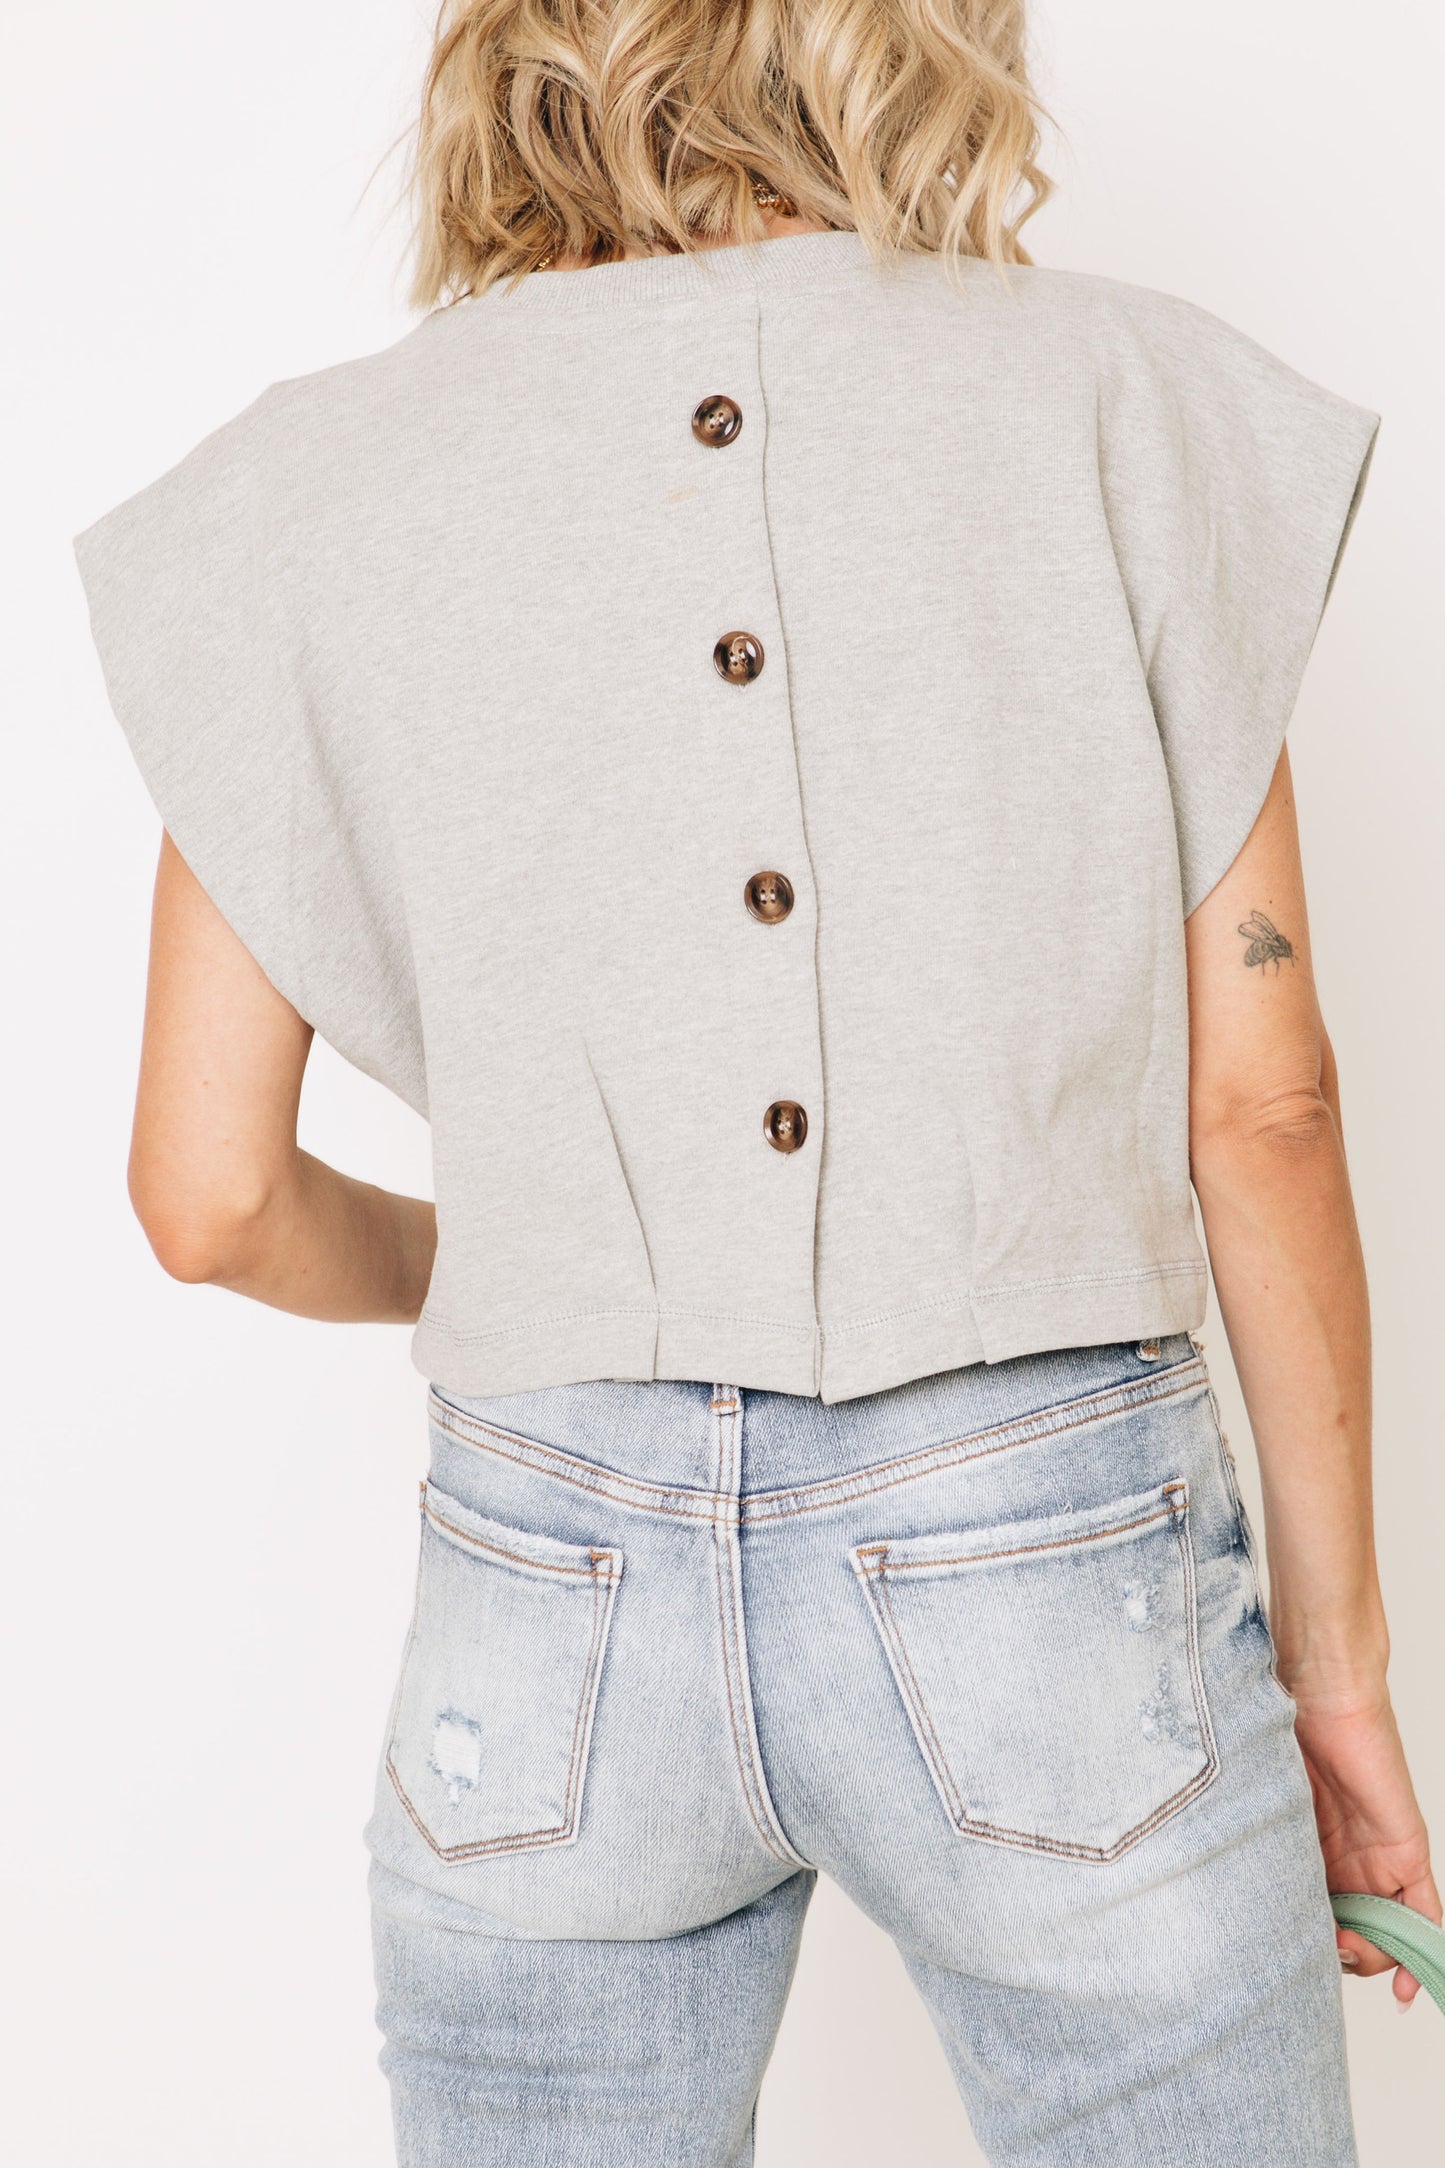 Back Button Up Top (S-L)